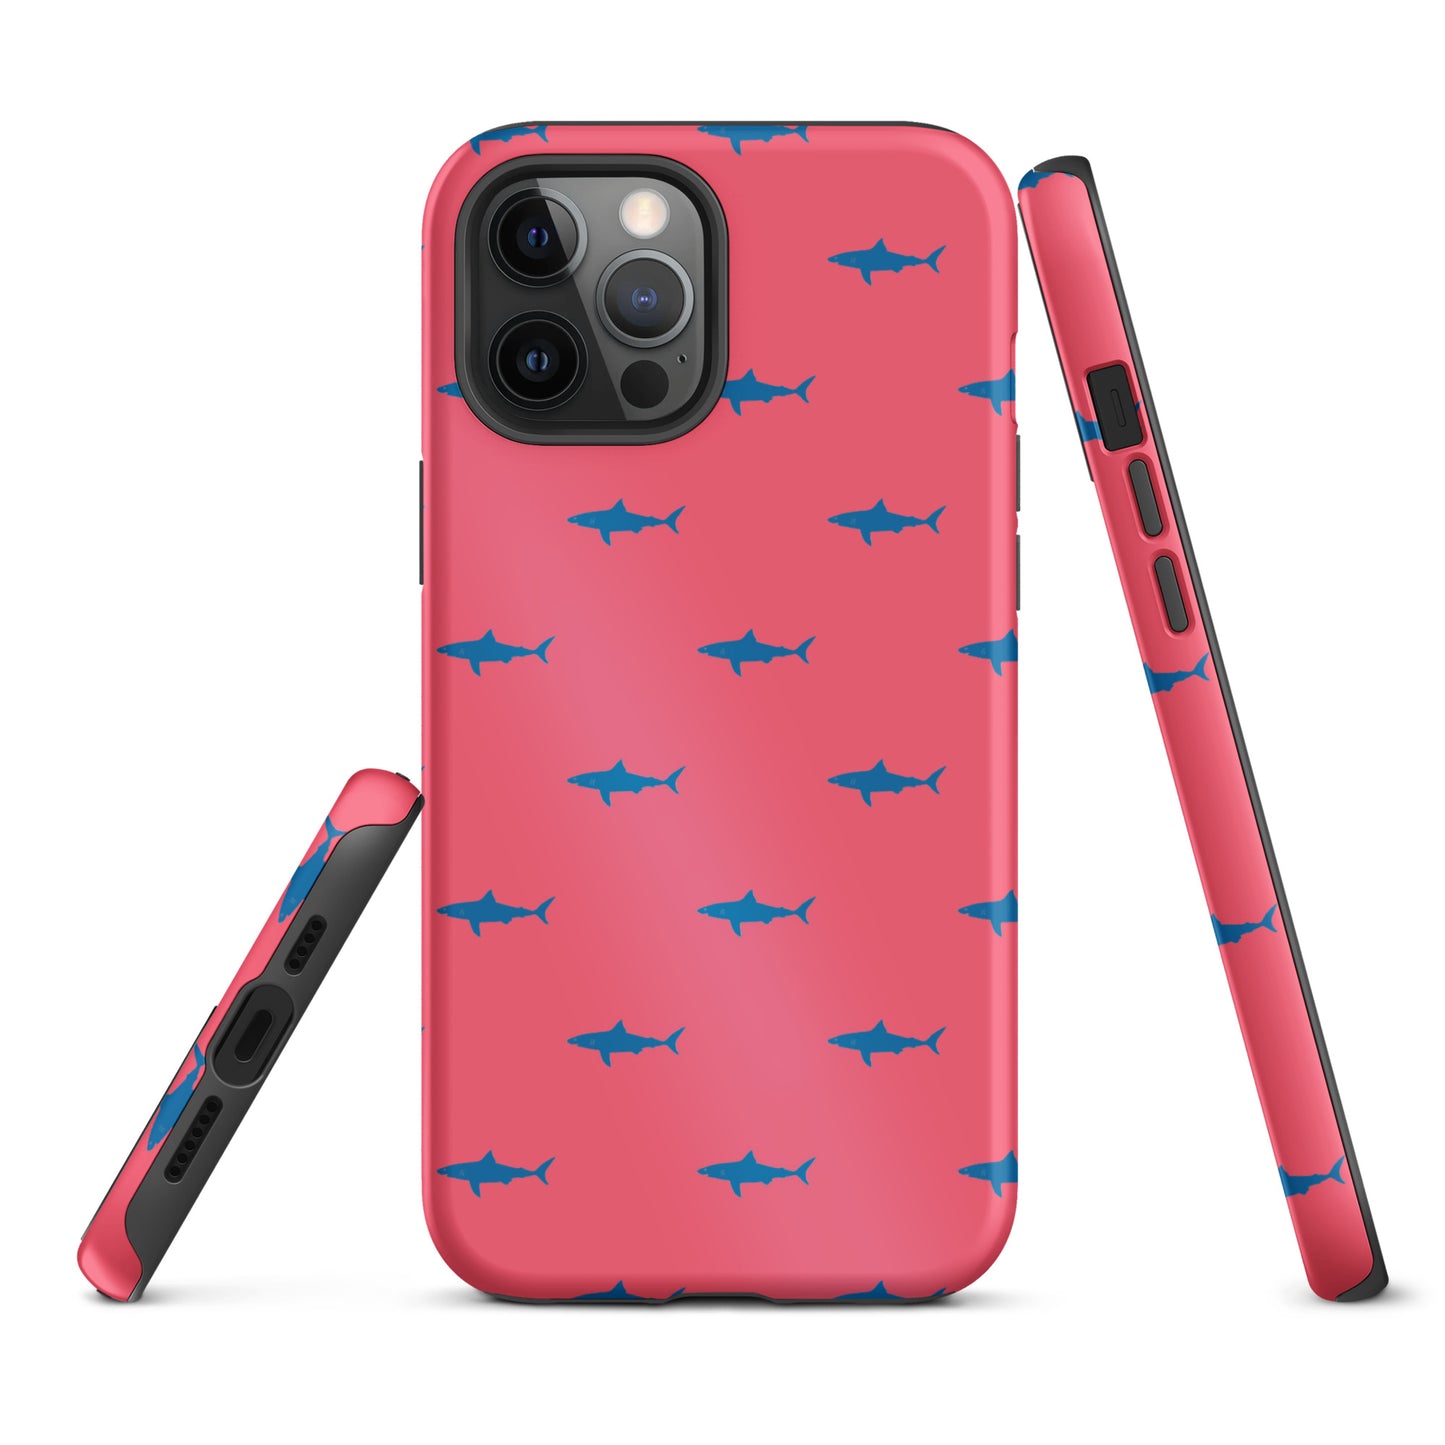 Shark iPhone Case - Blue on Coral